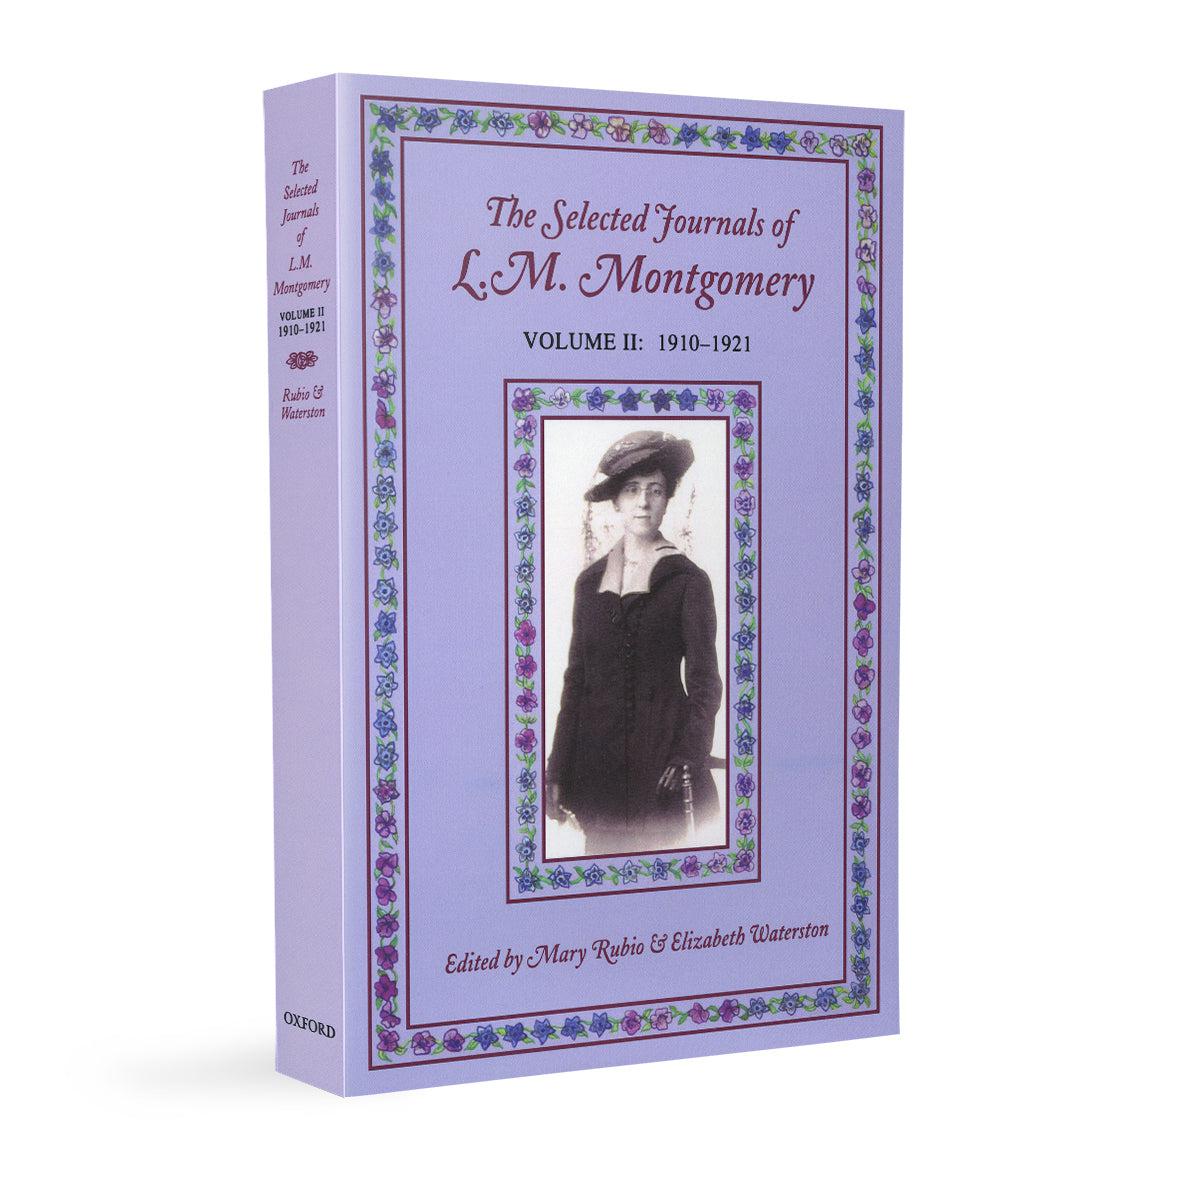 The Selected Journals of L.M.Montgomery Volume II: 1910-1921